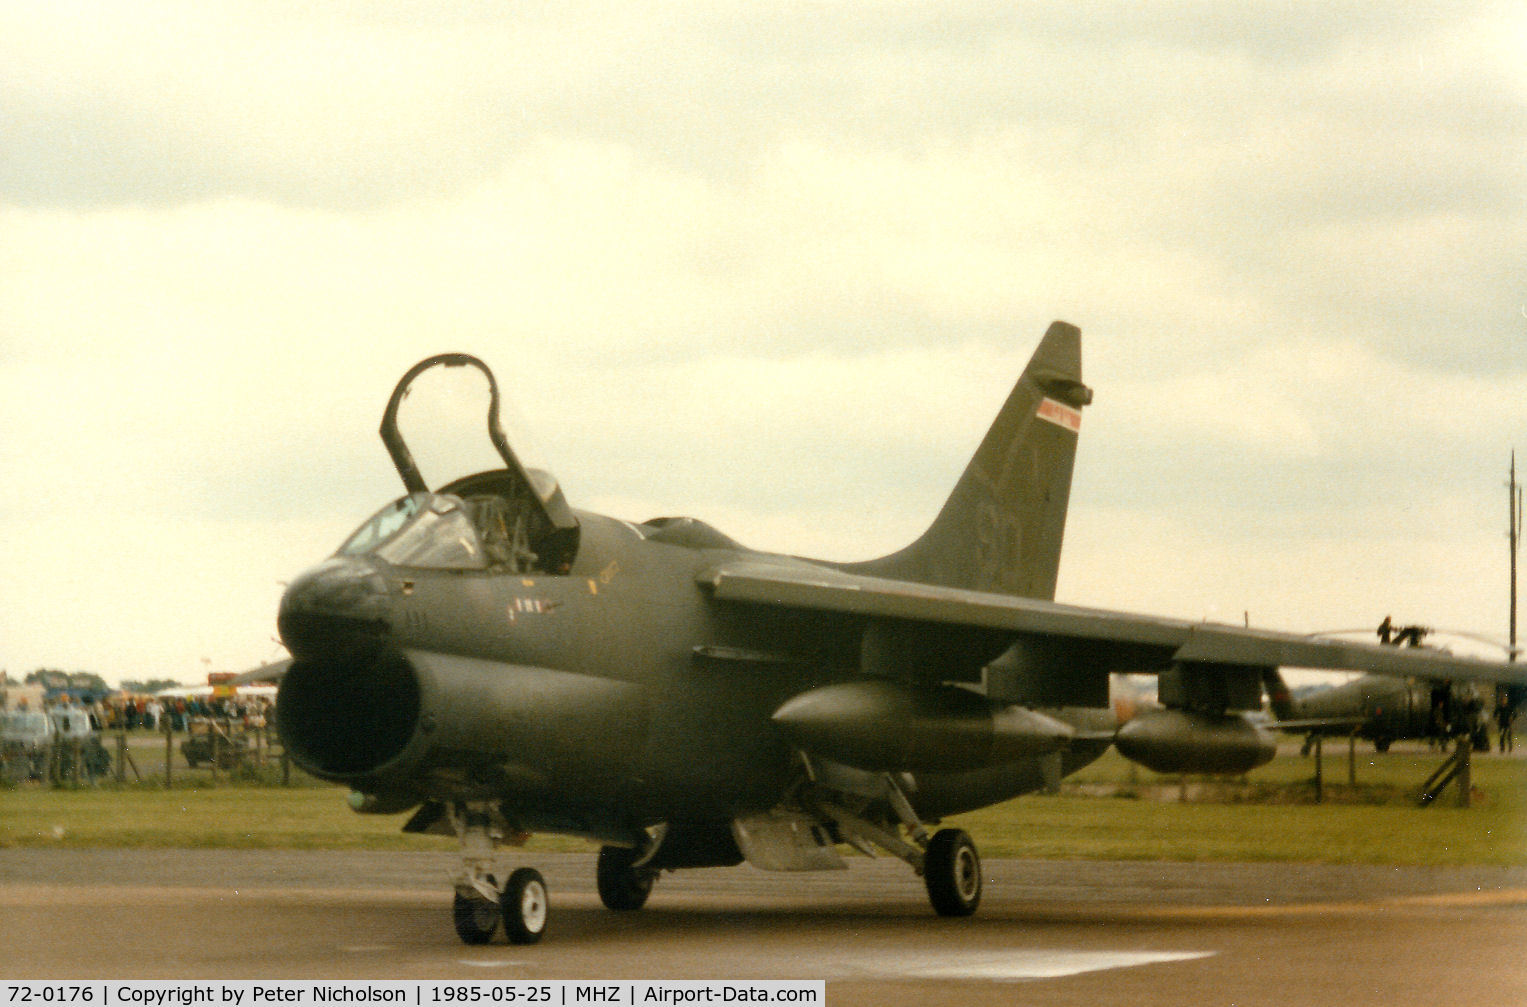 72-0176, 1972 LTV A-7D Corsair II C/N D-298, A-7D Corsair of 175th Tactical Fighter Squadron of the South Dakota Air National Guard on the flight-line at the 1985 RAF Mildenhall Air Fete.